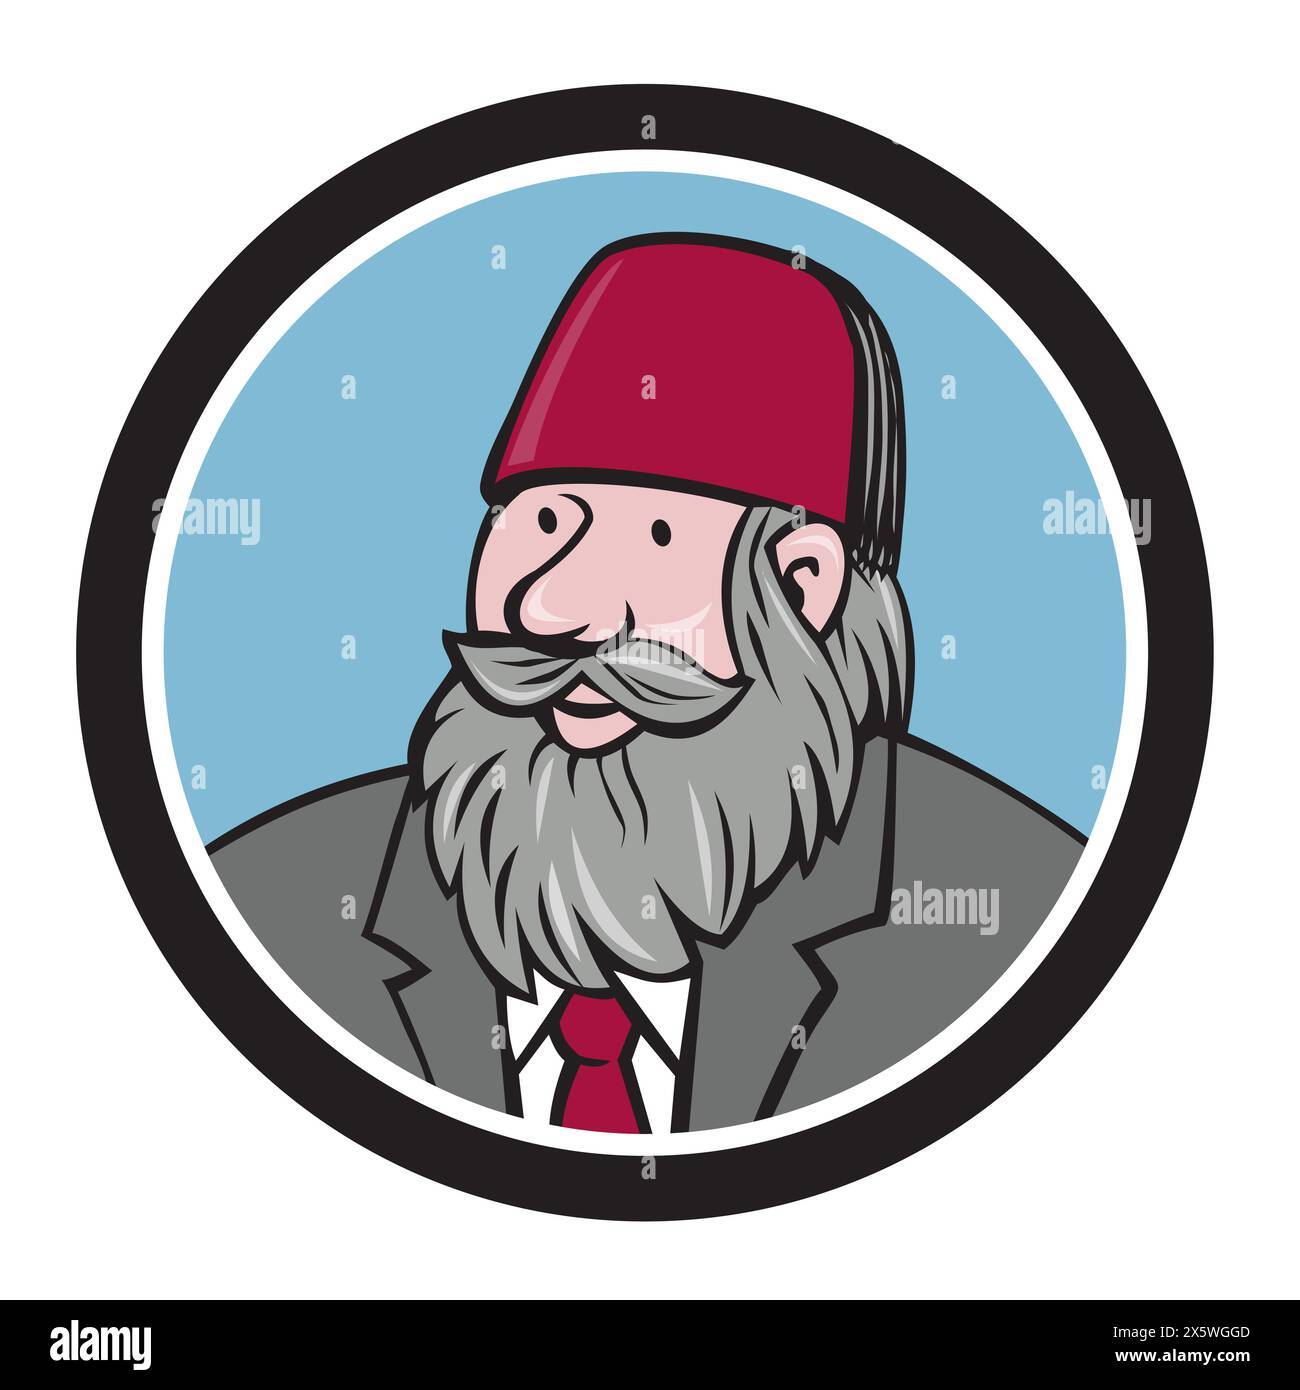 Illustration of a bust of man with beard wearing maroon fez hat and suit looking to the side viewed from front set inside circle done in cartoon style Stock Vector